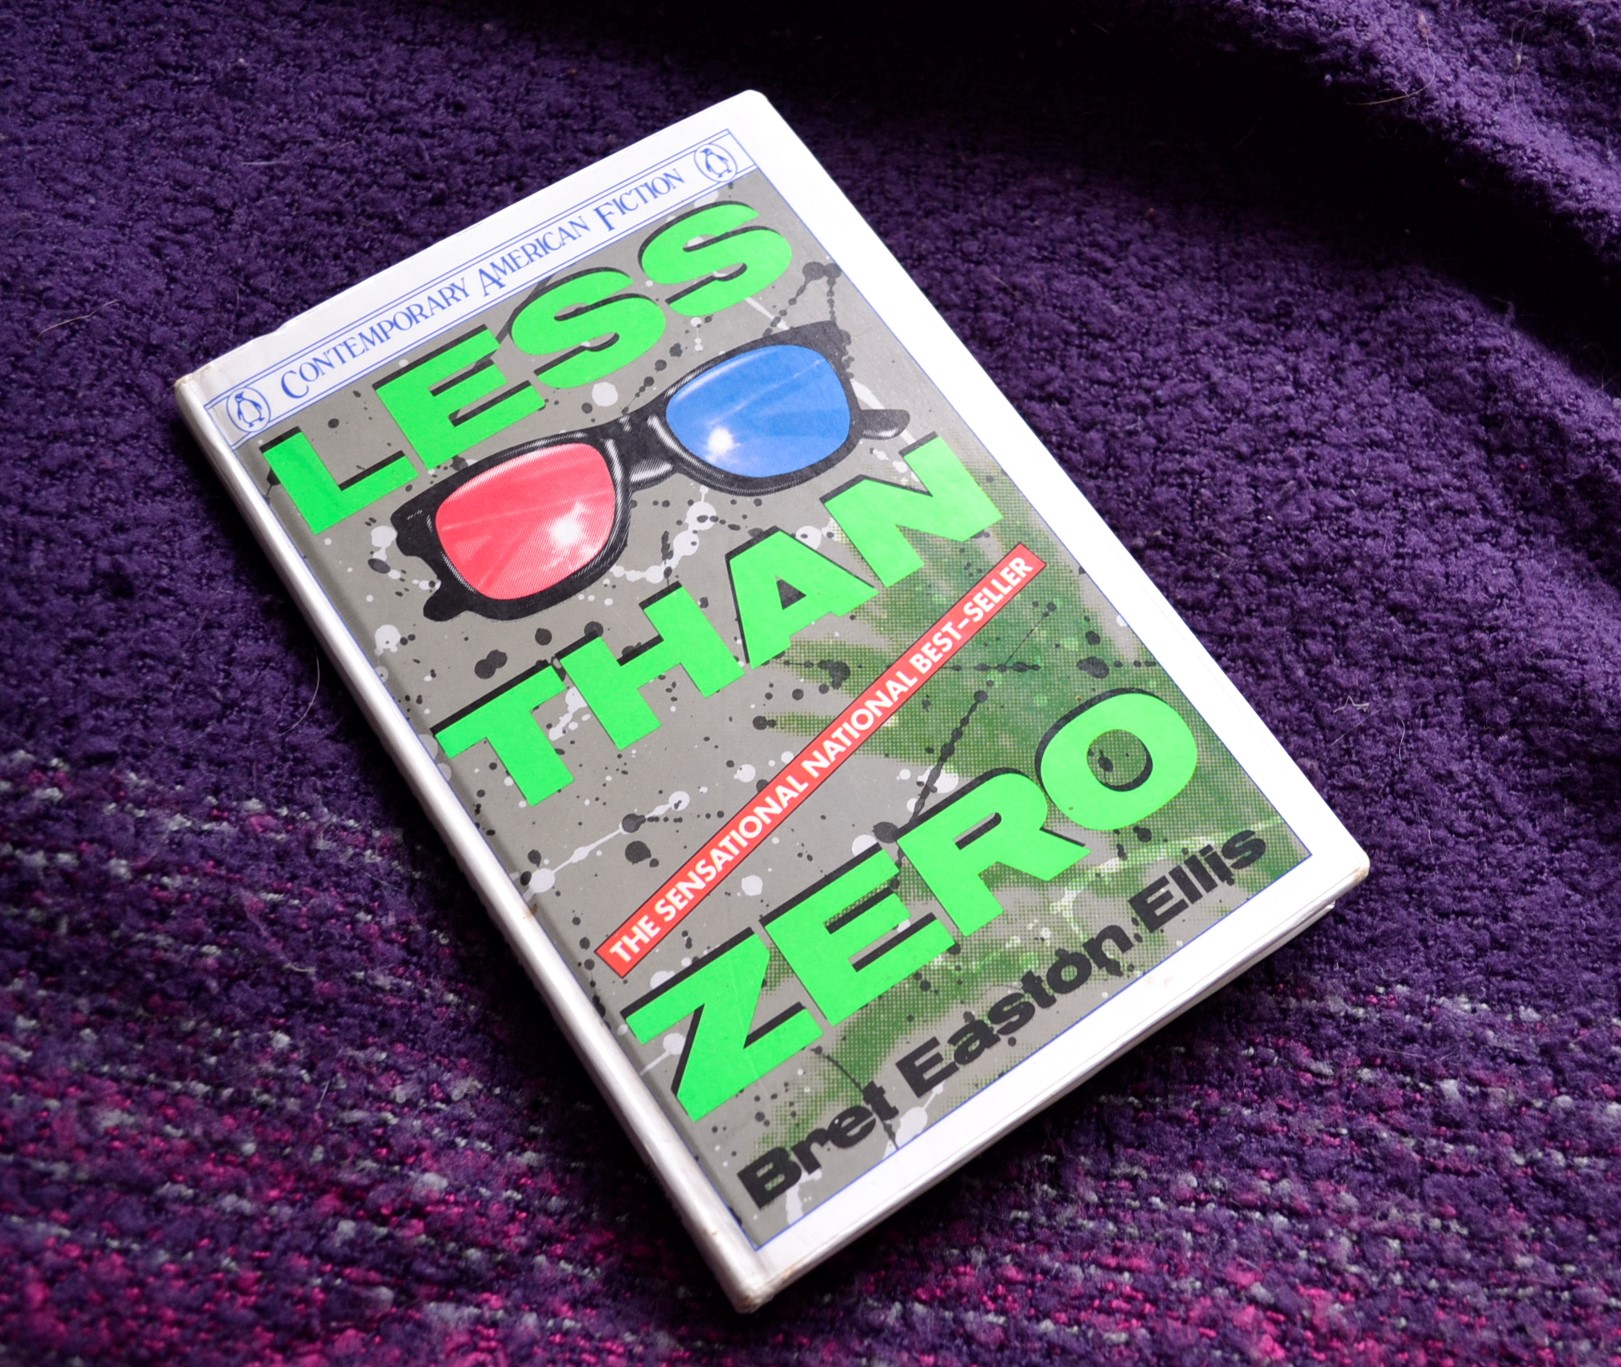 The title 'Less Than Zero' is visible on a book decorated with neon, splatter print, and 3-D glasses.